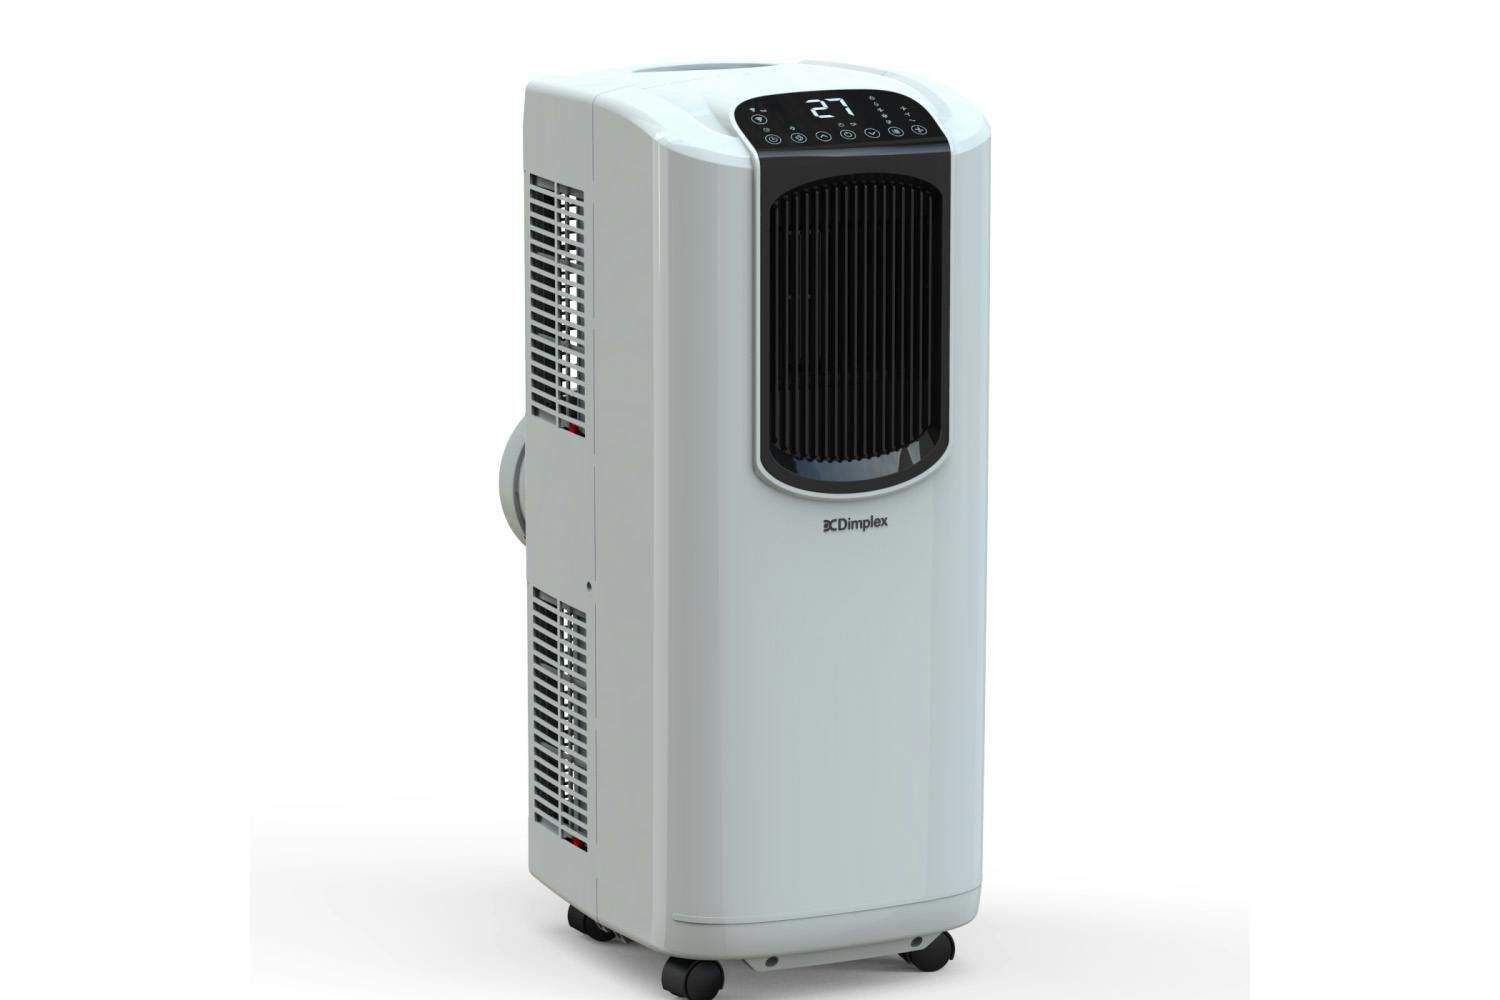 Dimplex 2.6kW Portable Air Conditioner with Dehumidifier | DPAC901